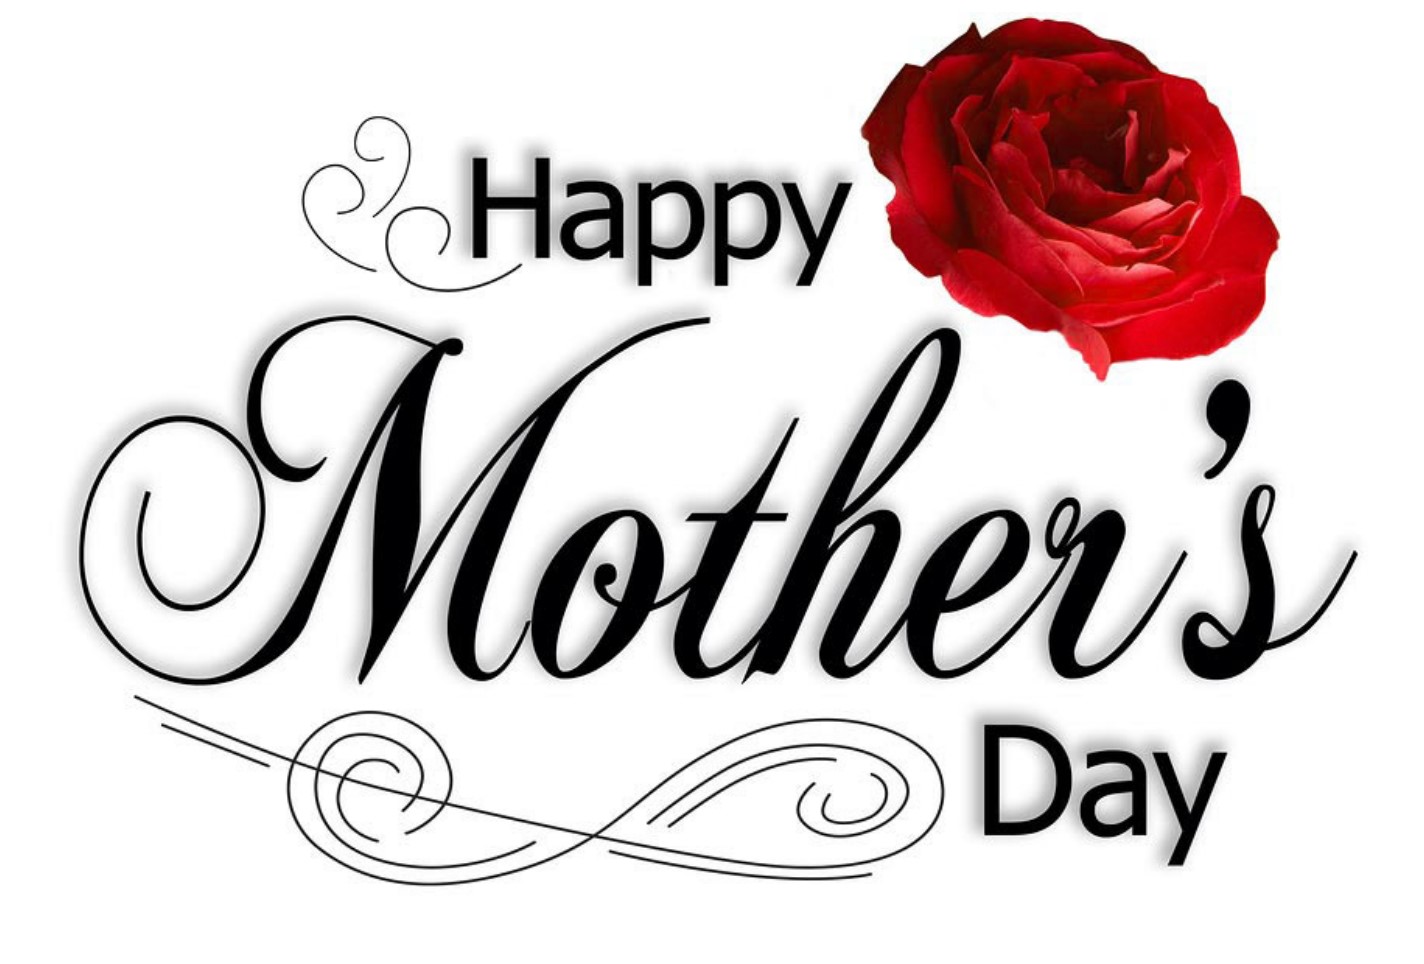 Happy Mothers Day 2019 Hd Wallpaper Download Free | Hd Walls